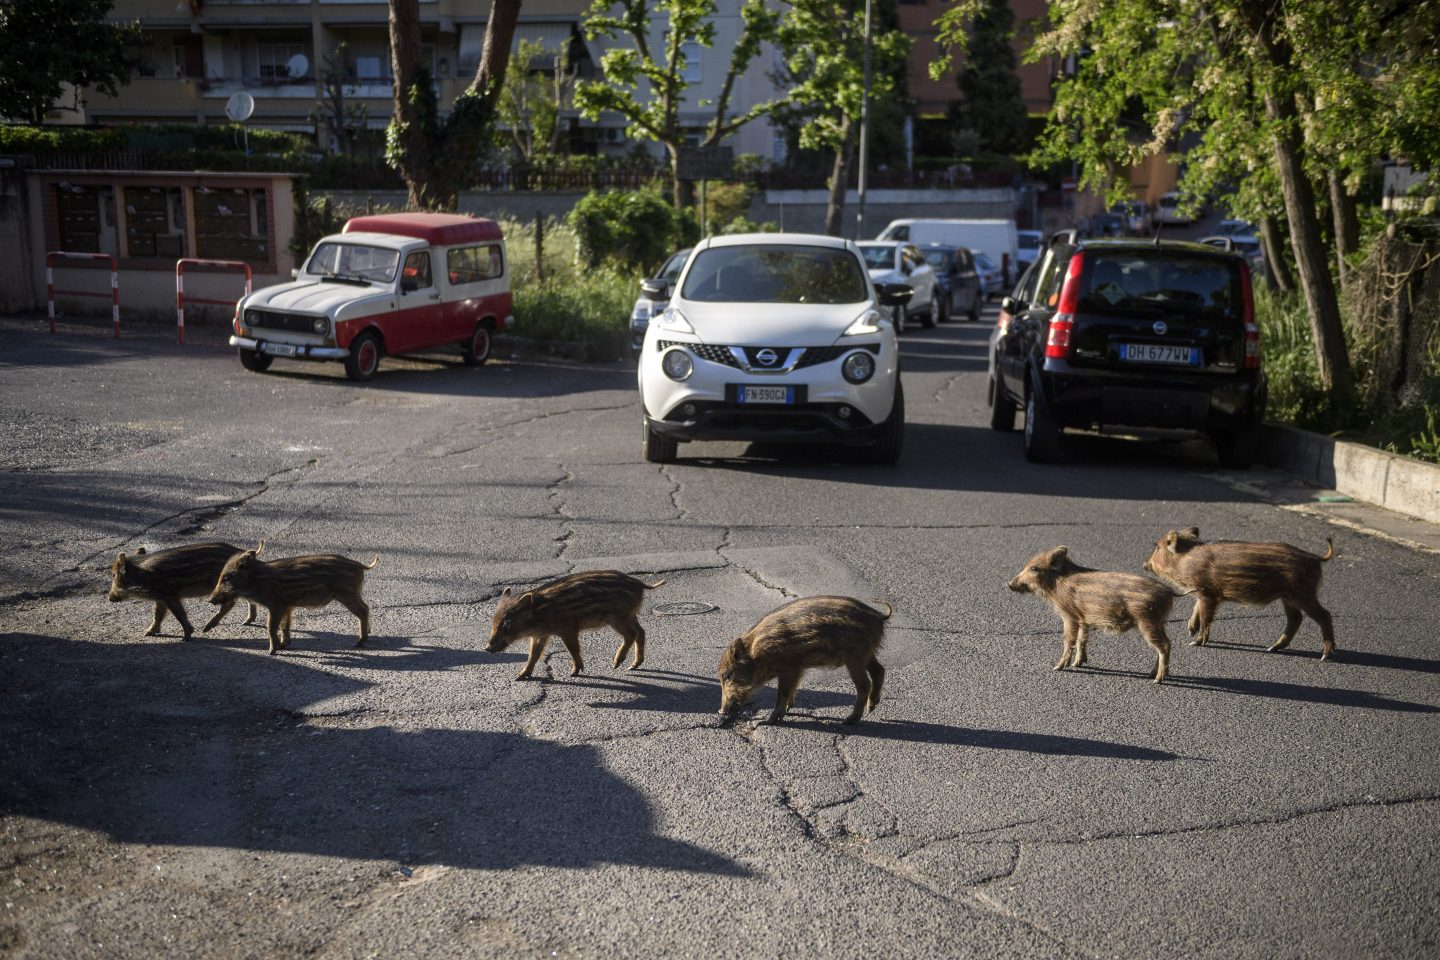 wild boars on a street in Italy